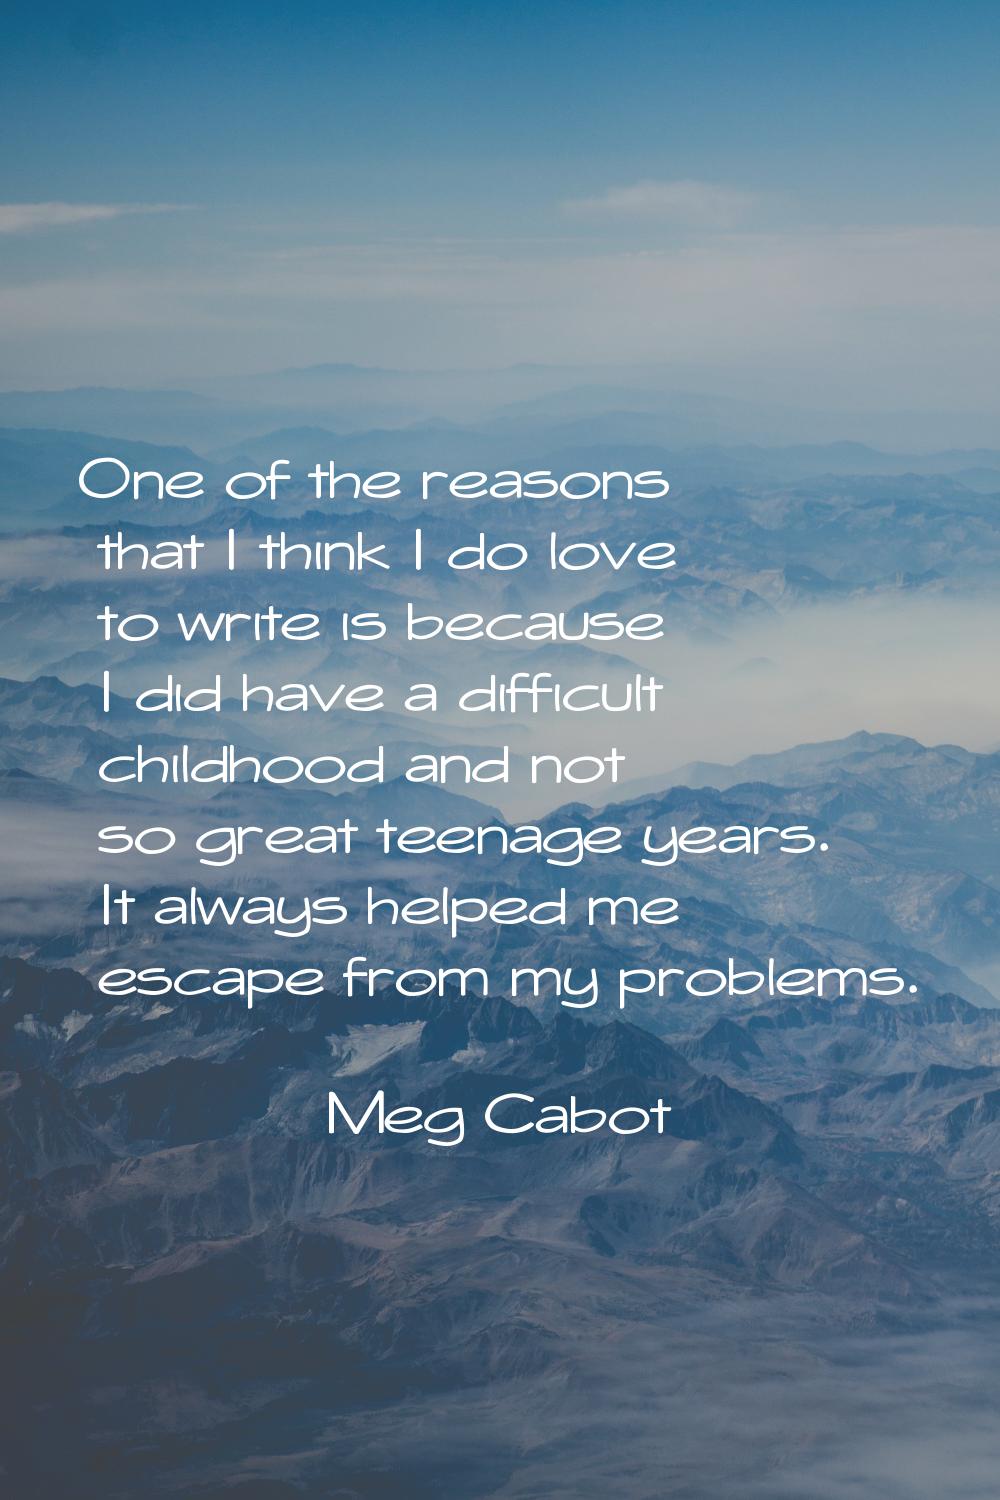 One of the reasons that I think I do love to write is because I did have a difficult childhood and 